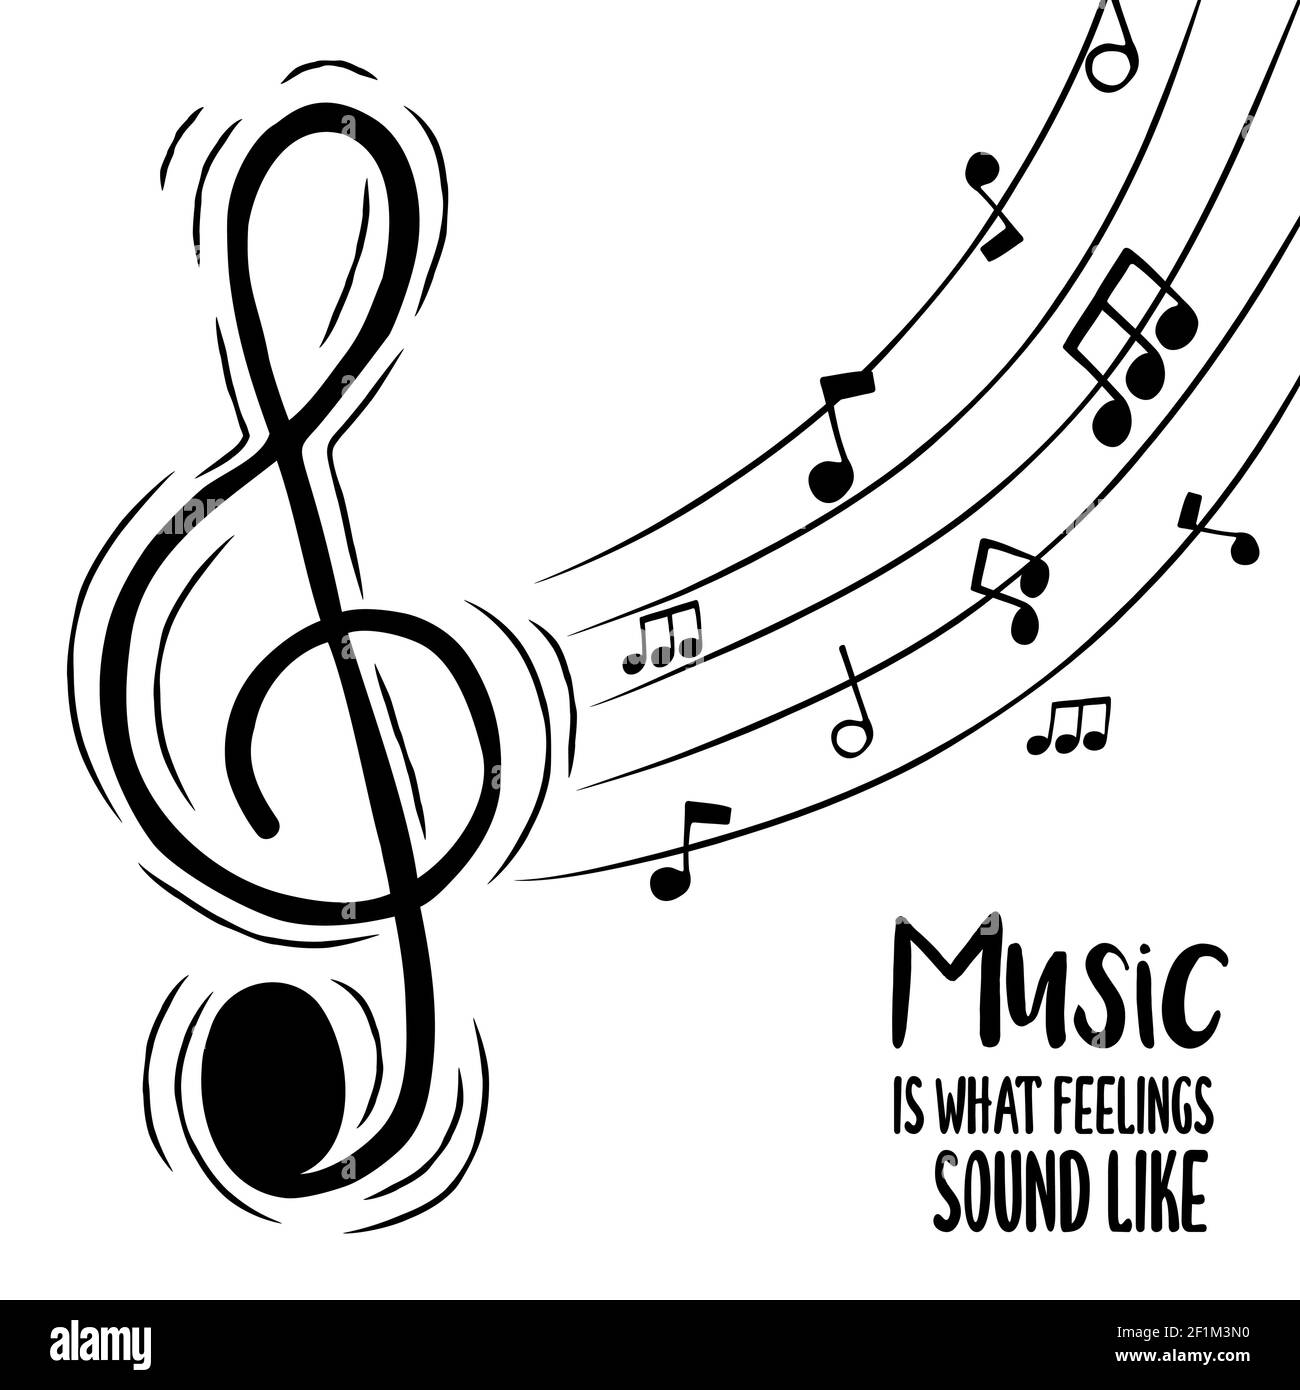 Music is what feelings sound like text quote illustration for musical love concept. Treble clef cartoon with audio note background. Stock Vector